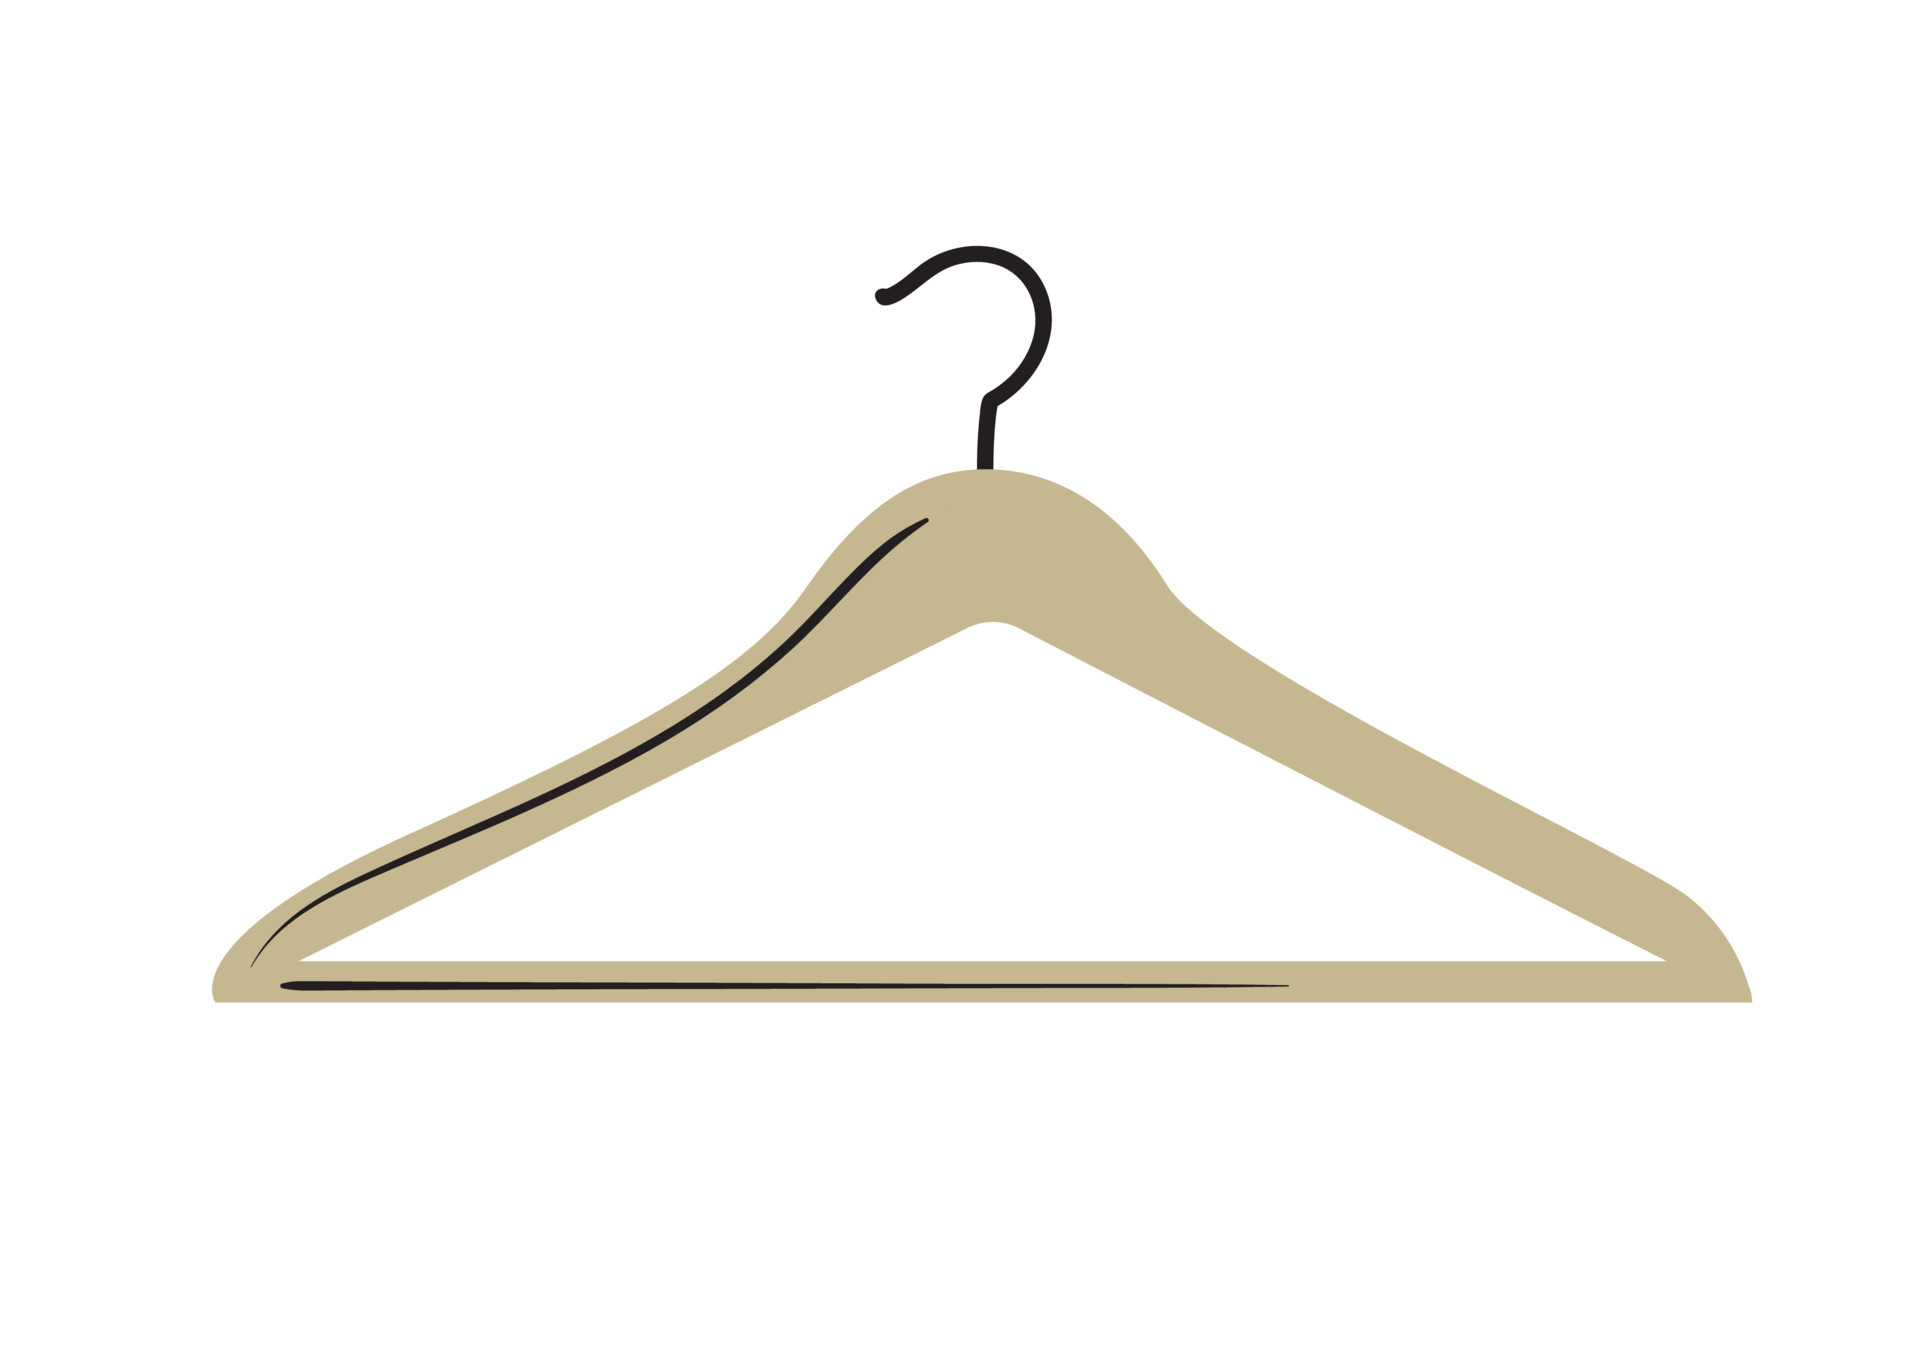 https://static.vecteezy.com/system/resources/previews/005/860/688/original/clothes-hanger-illustration-in-vintage-cartoon-style-hand-drawn-vector.jpg